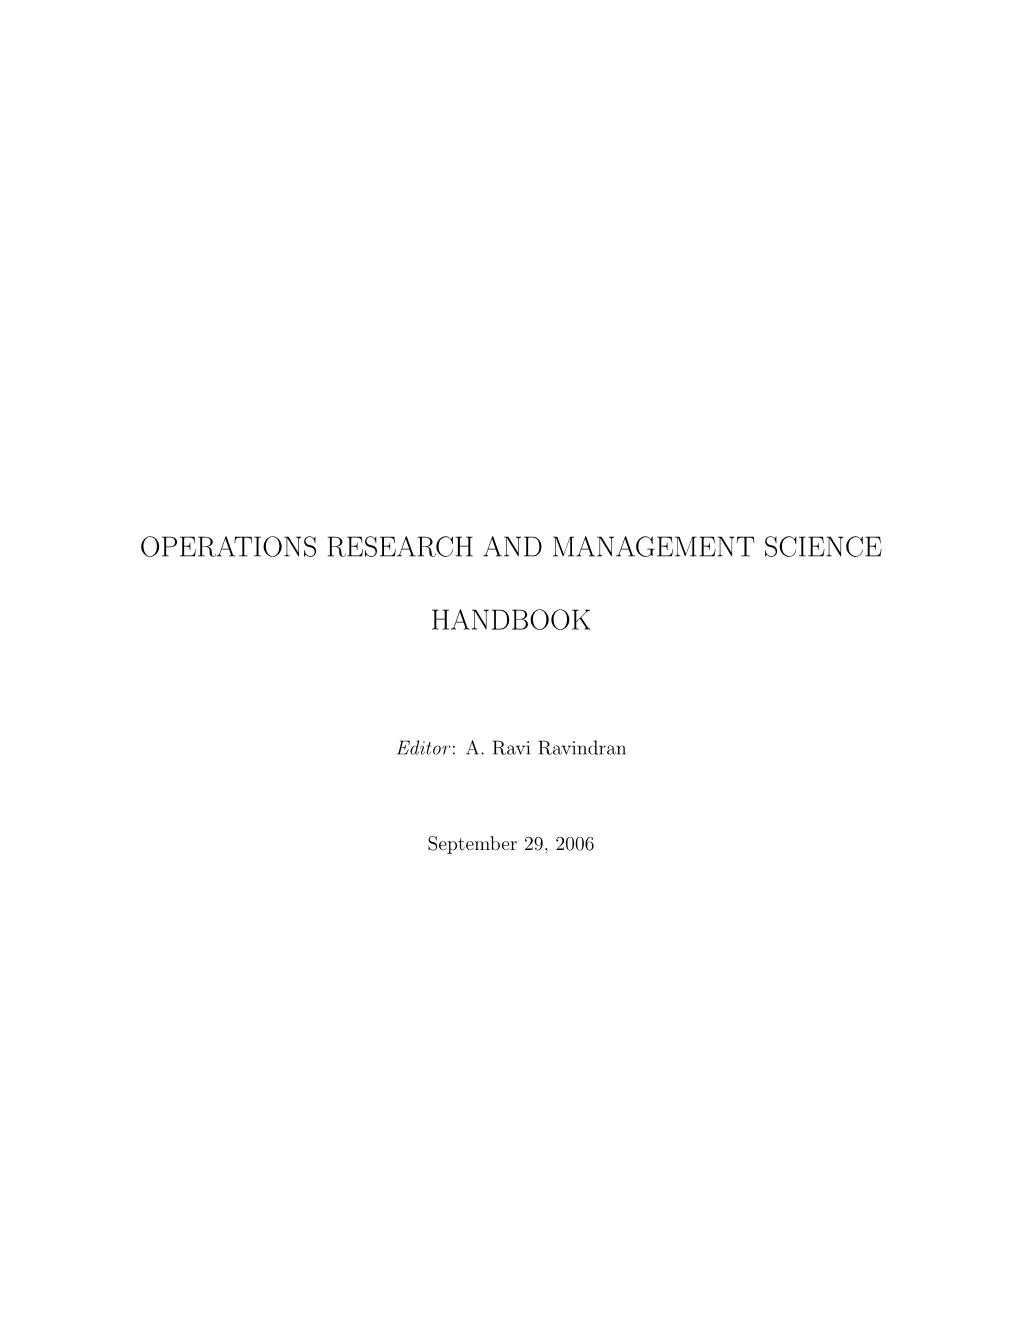 Operations Research and Management Science